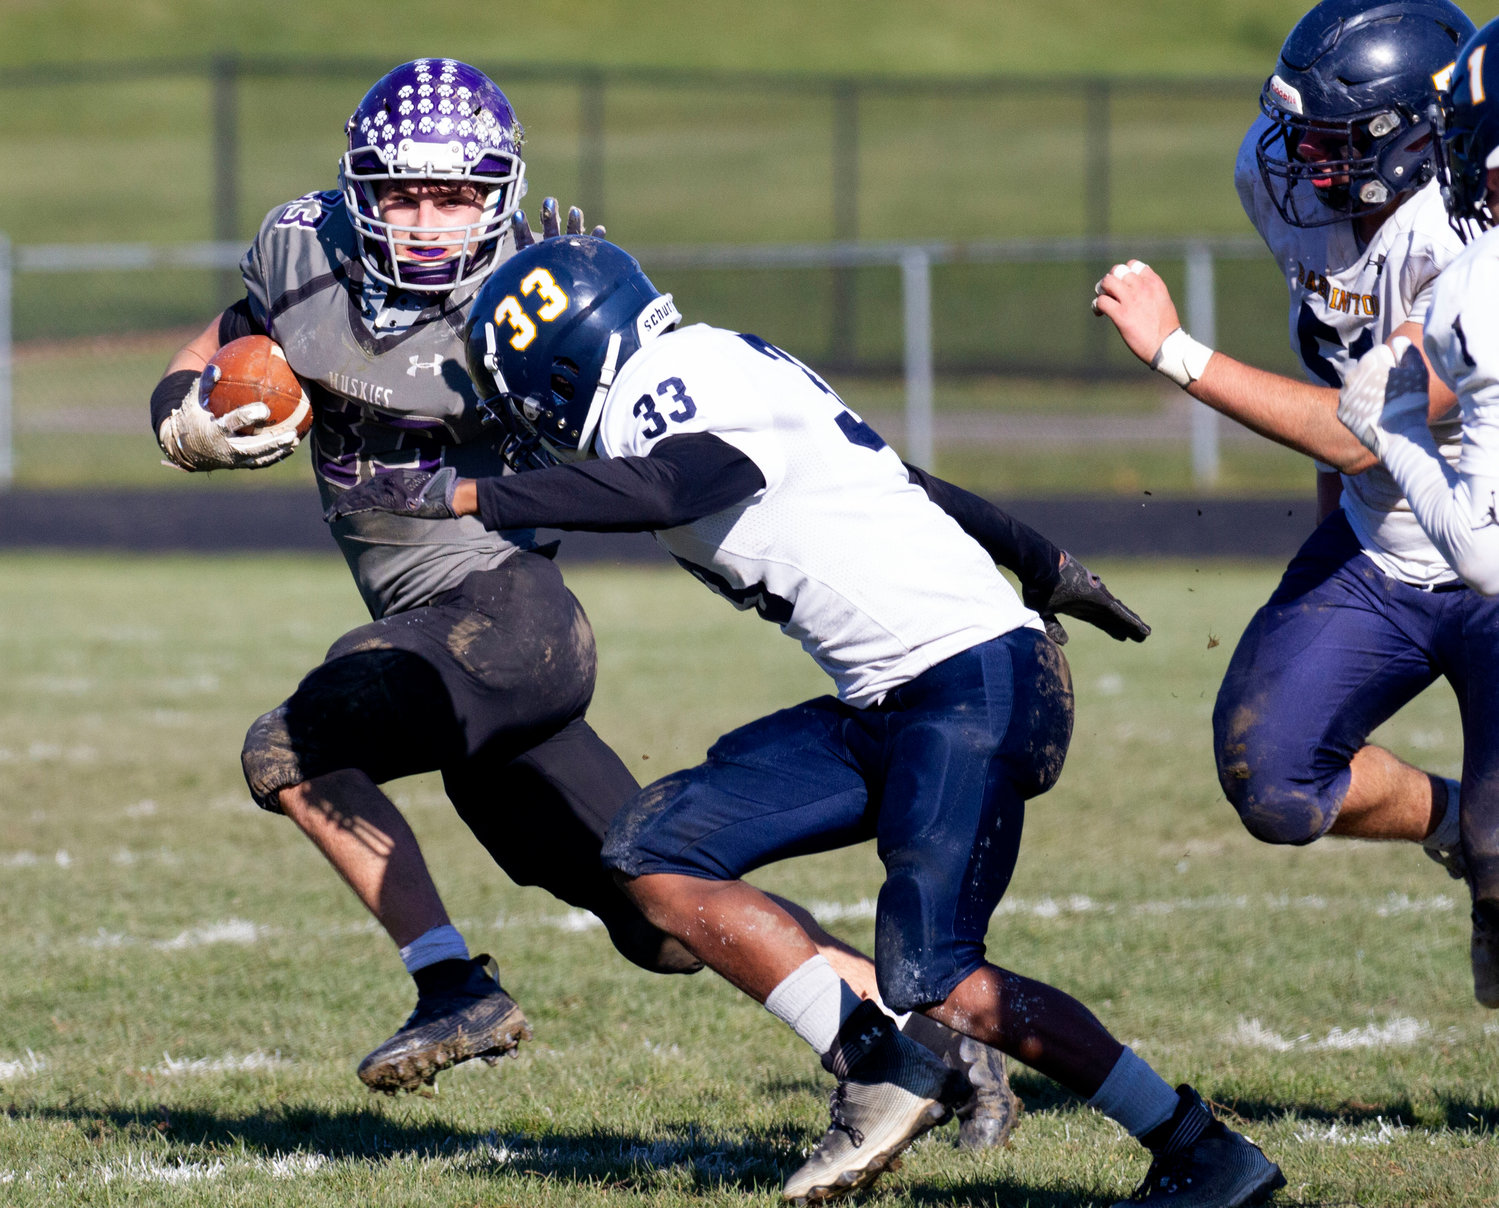 Running back Brock Pacheco speeds around an Eagles defender in the third quarter.